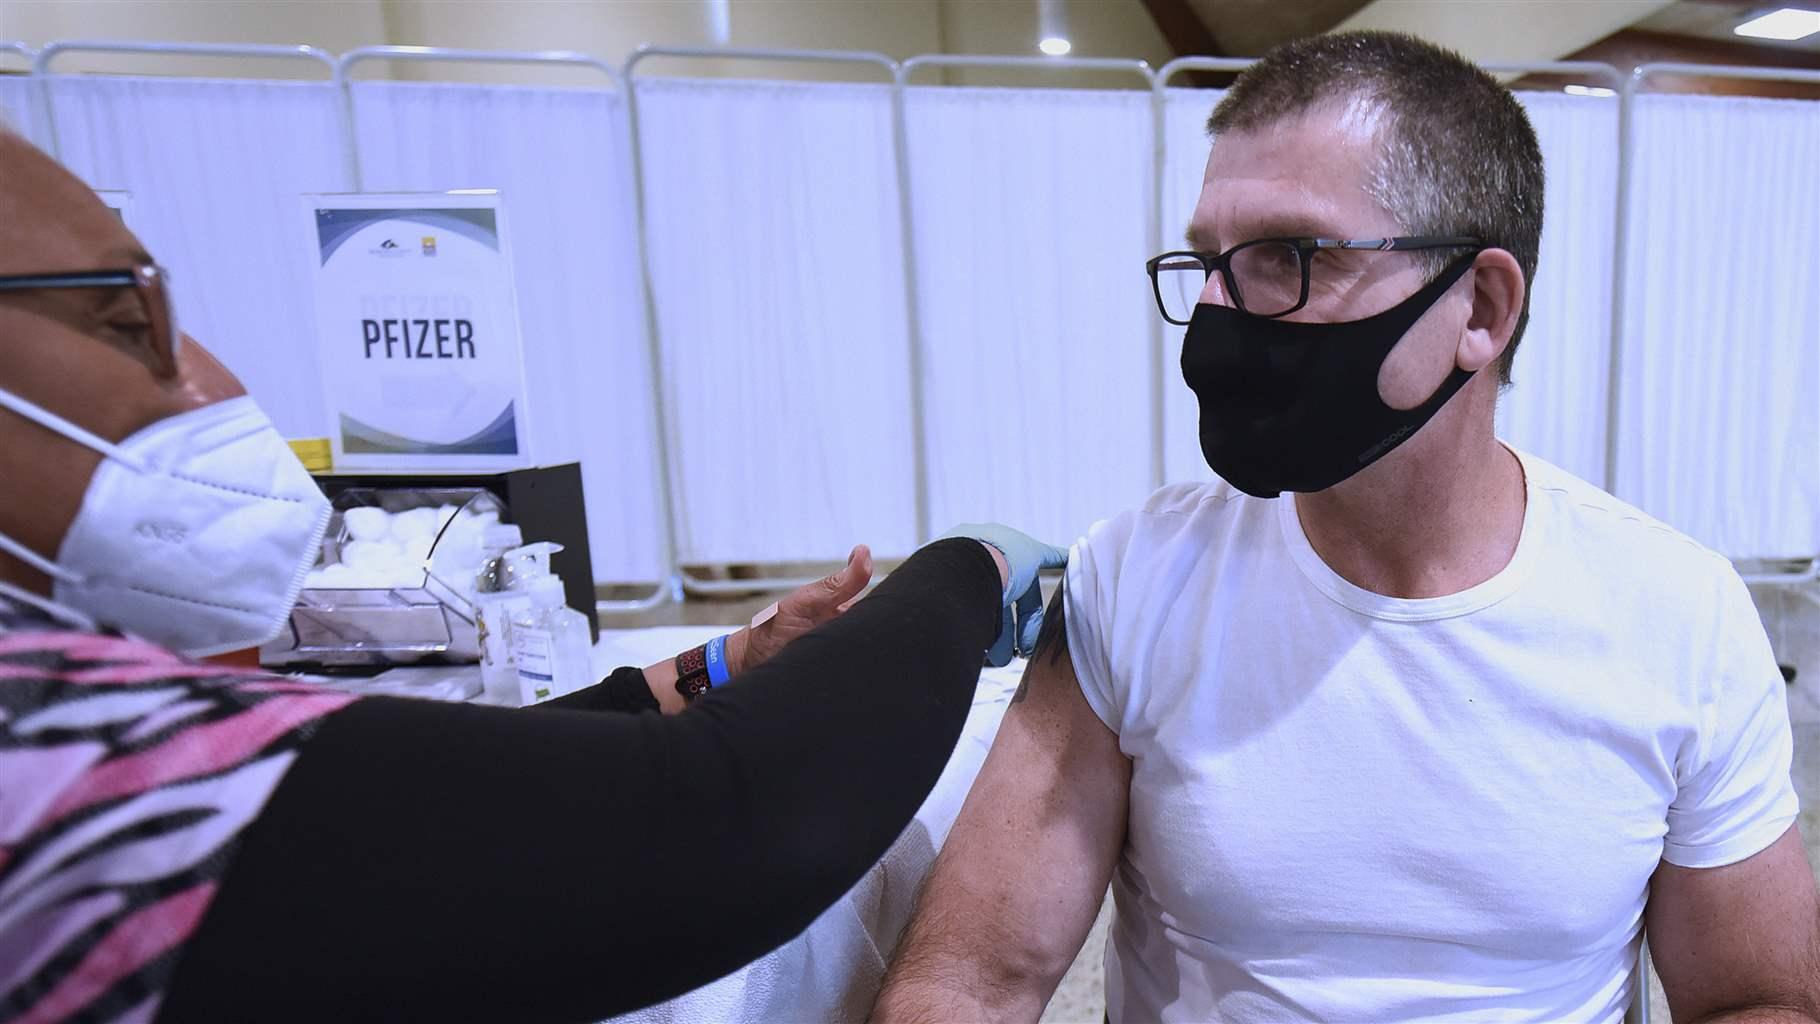 A health worker administers a dose of Pfizer COVID-19 vaccine to a man at Sanford Civic Center.